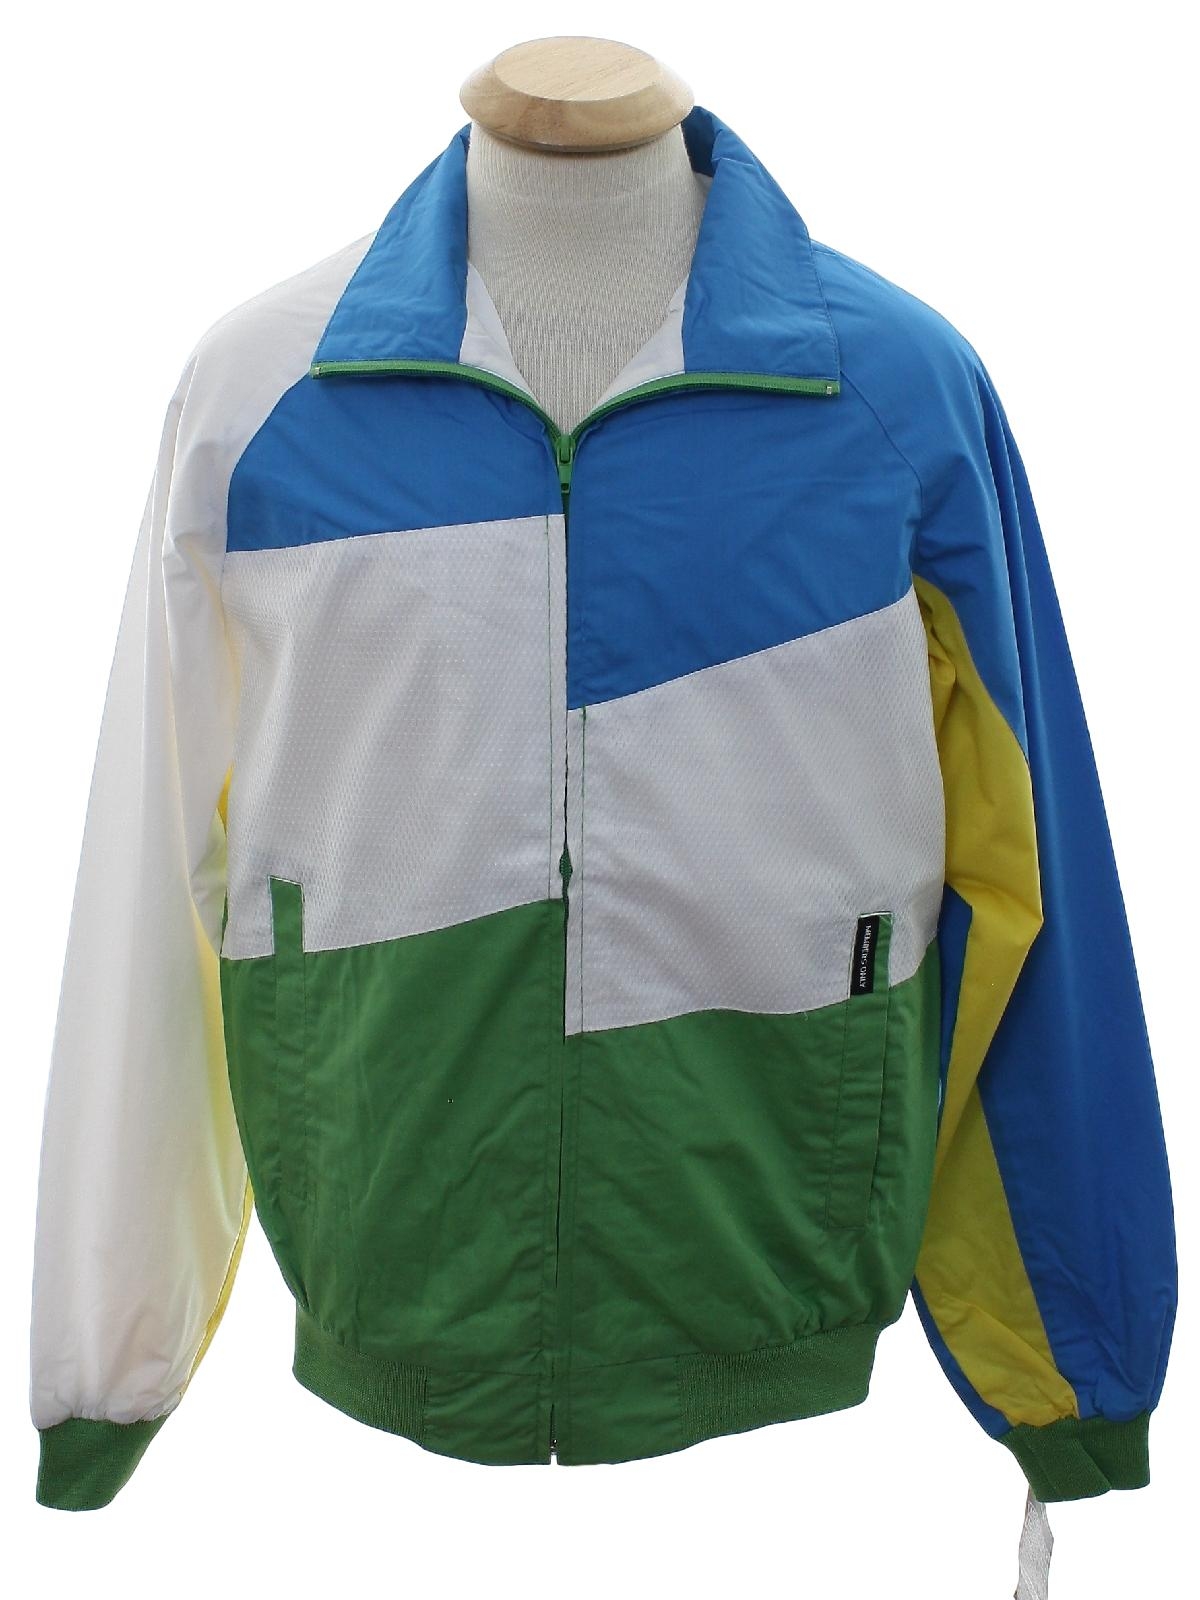 What color was your Members Only jacket in the 1980s? Mine was gray. :  r/nostalgia